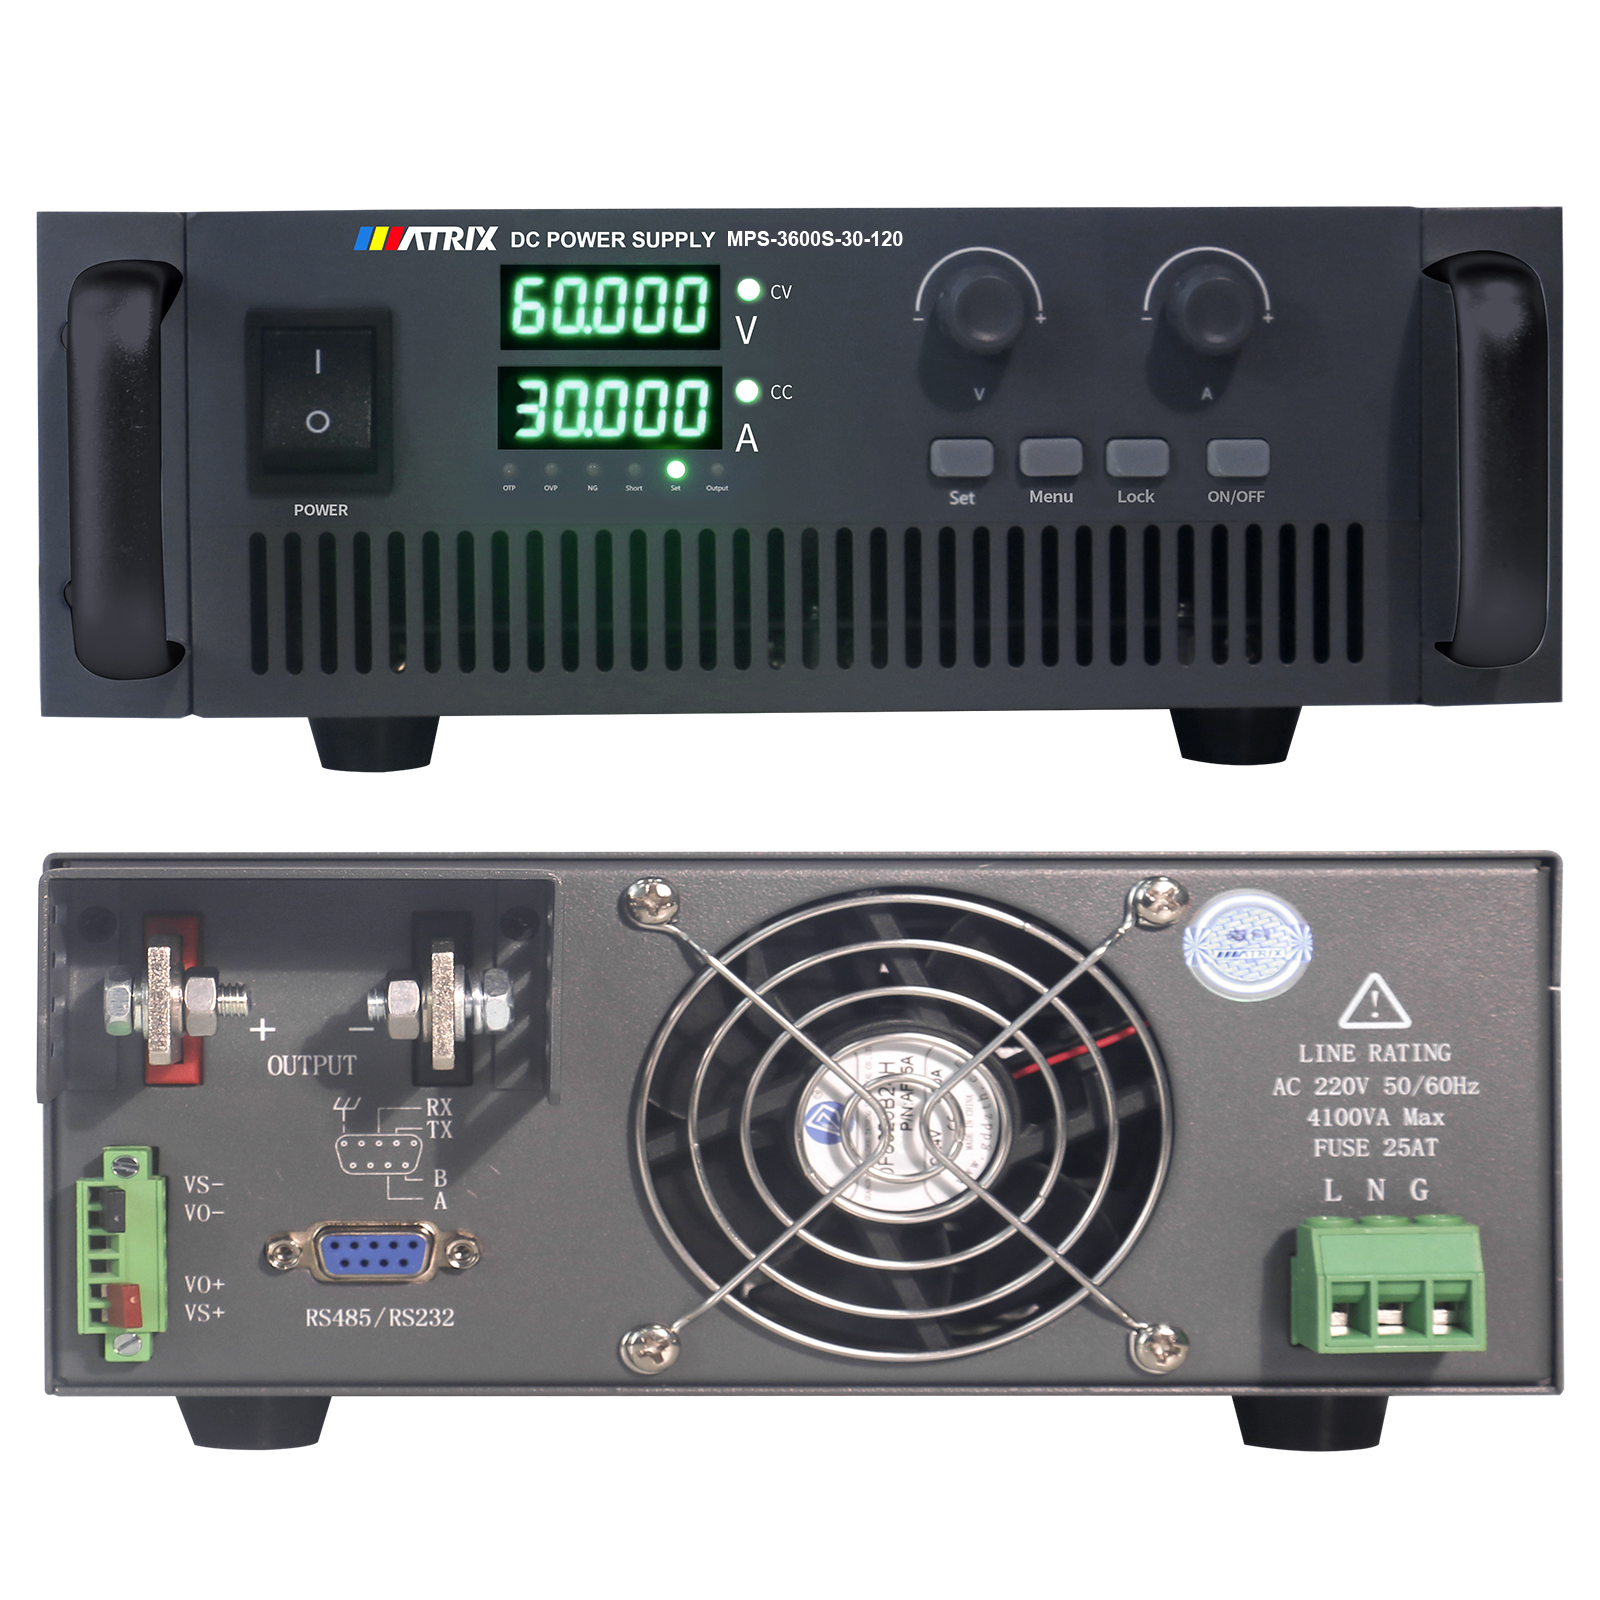 MPS-3600S-30-120